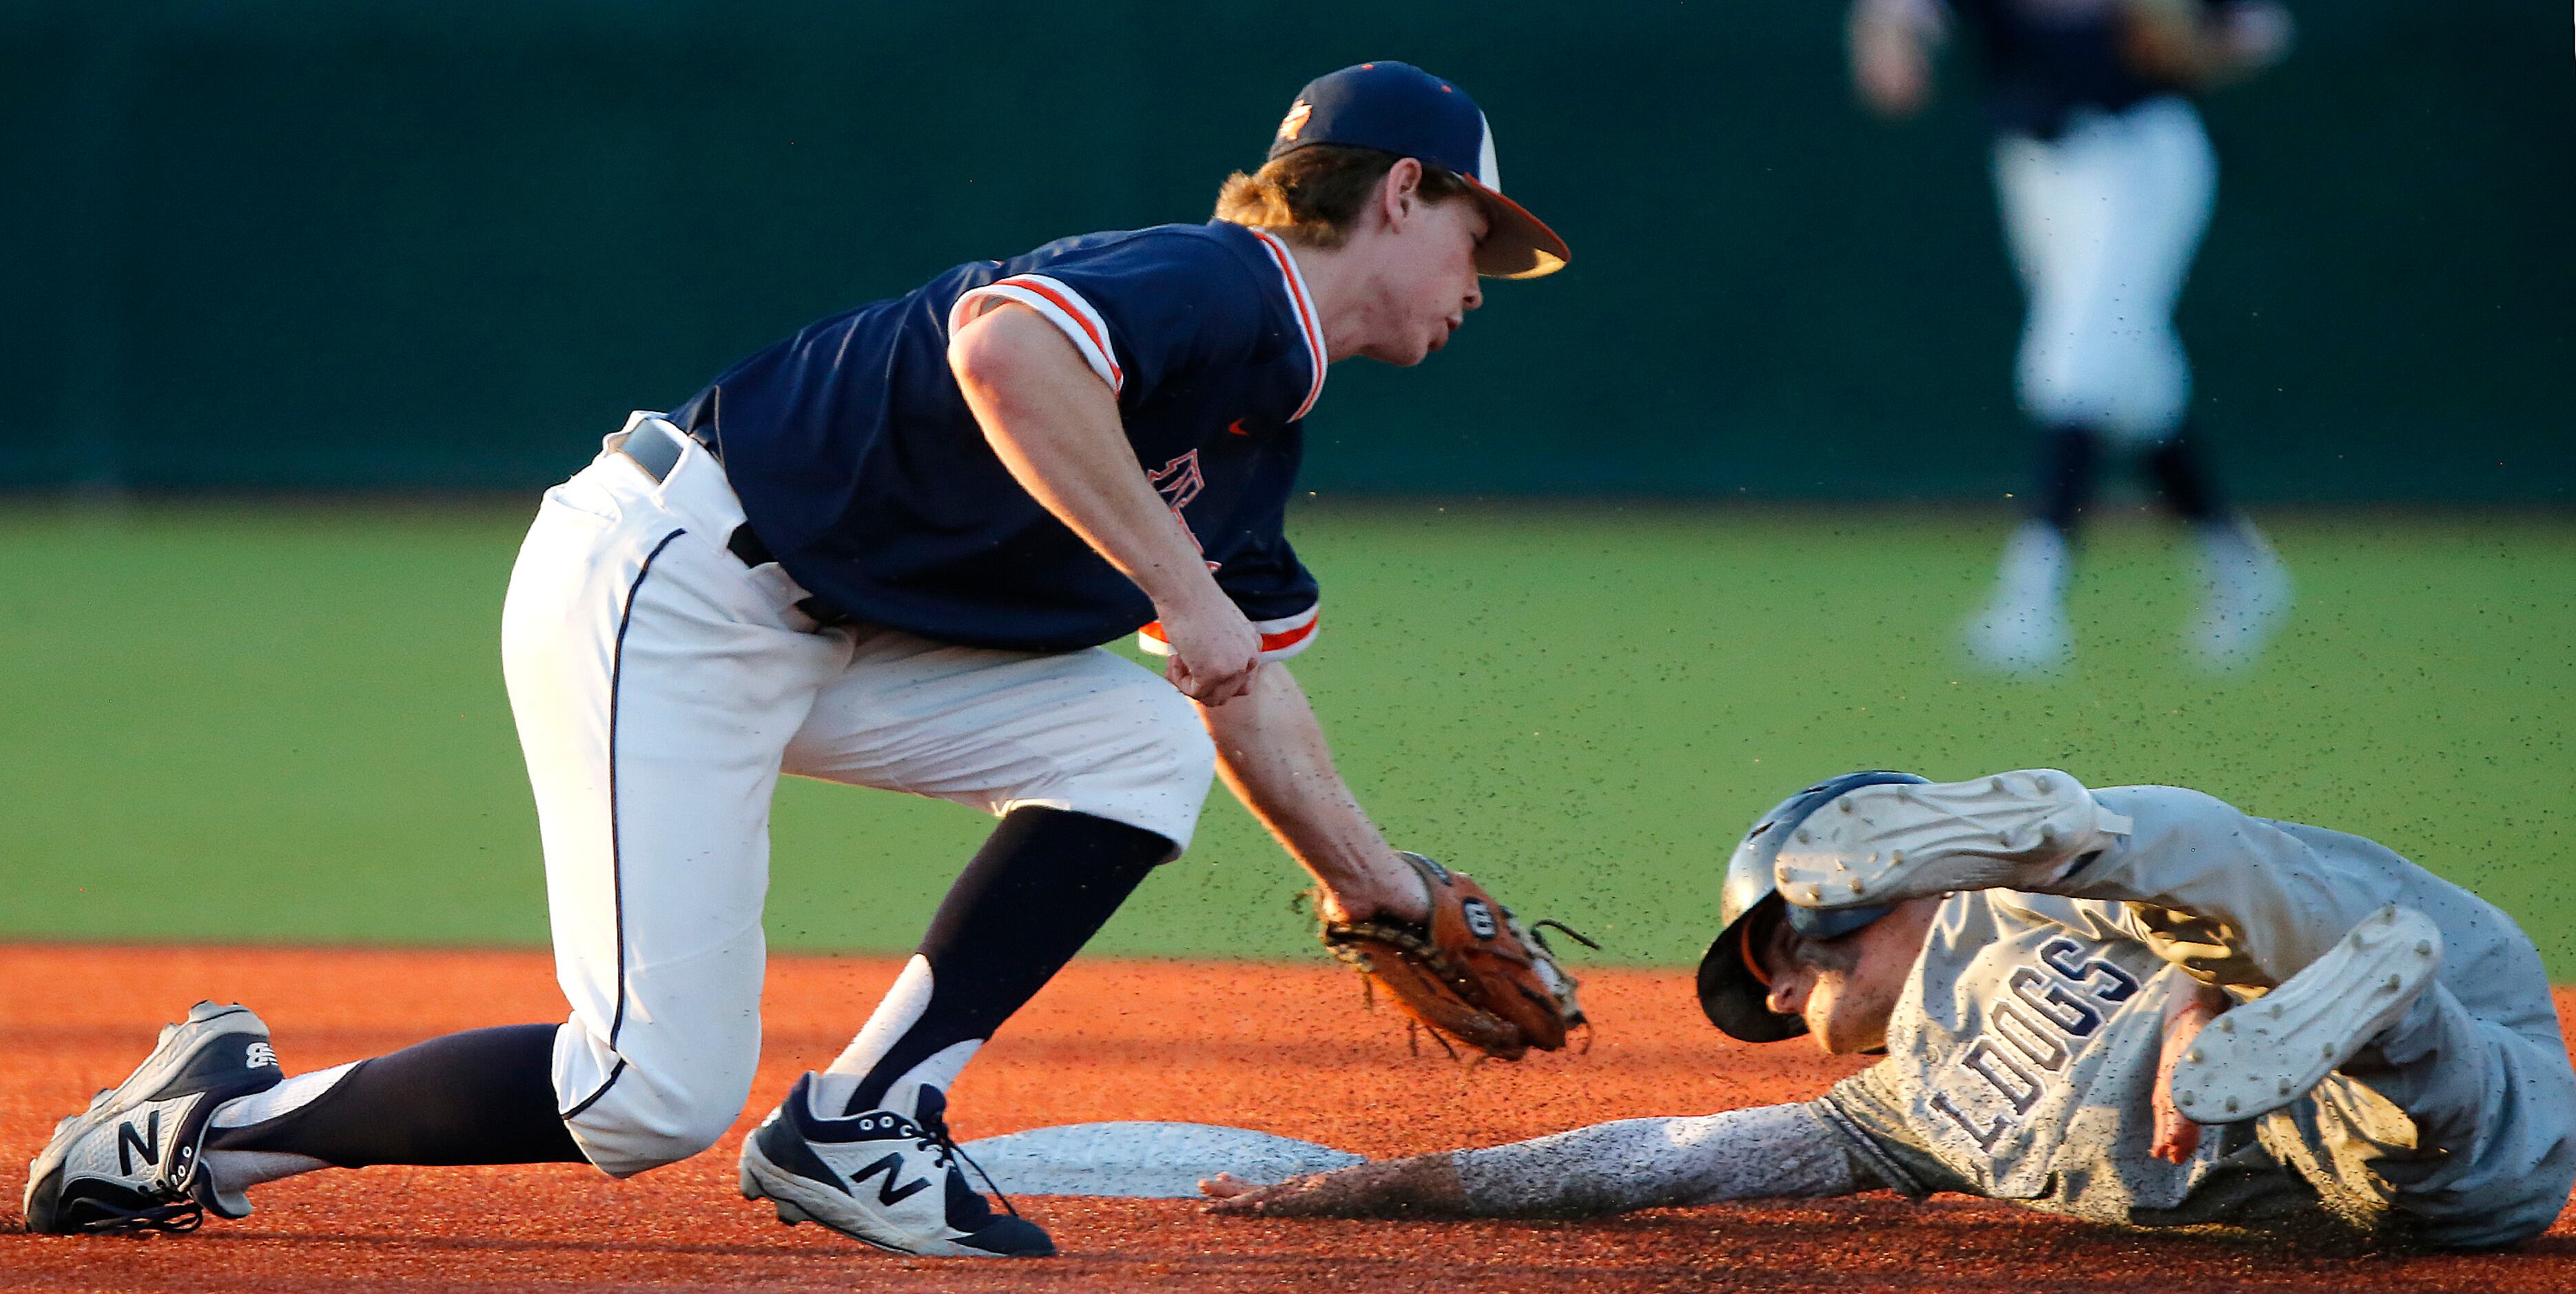 Wakeland High School shortstop Conor Linkfield (8) tags out McKinney North High School...